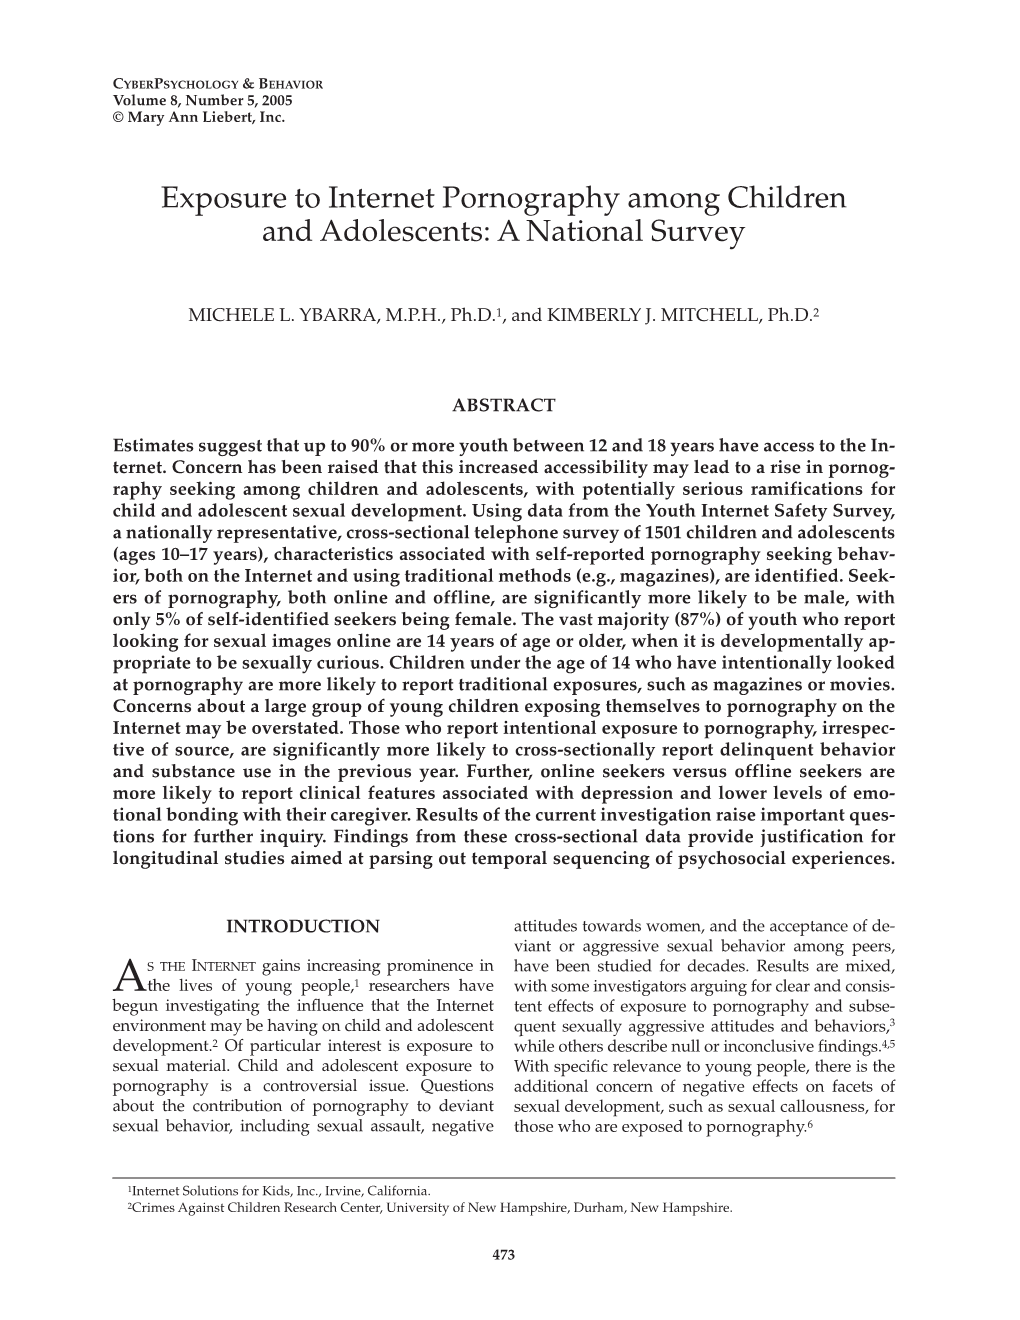 Exposure to Internet Pornography Among Children and Adolescents: a National Survey